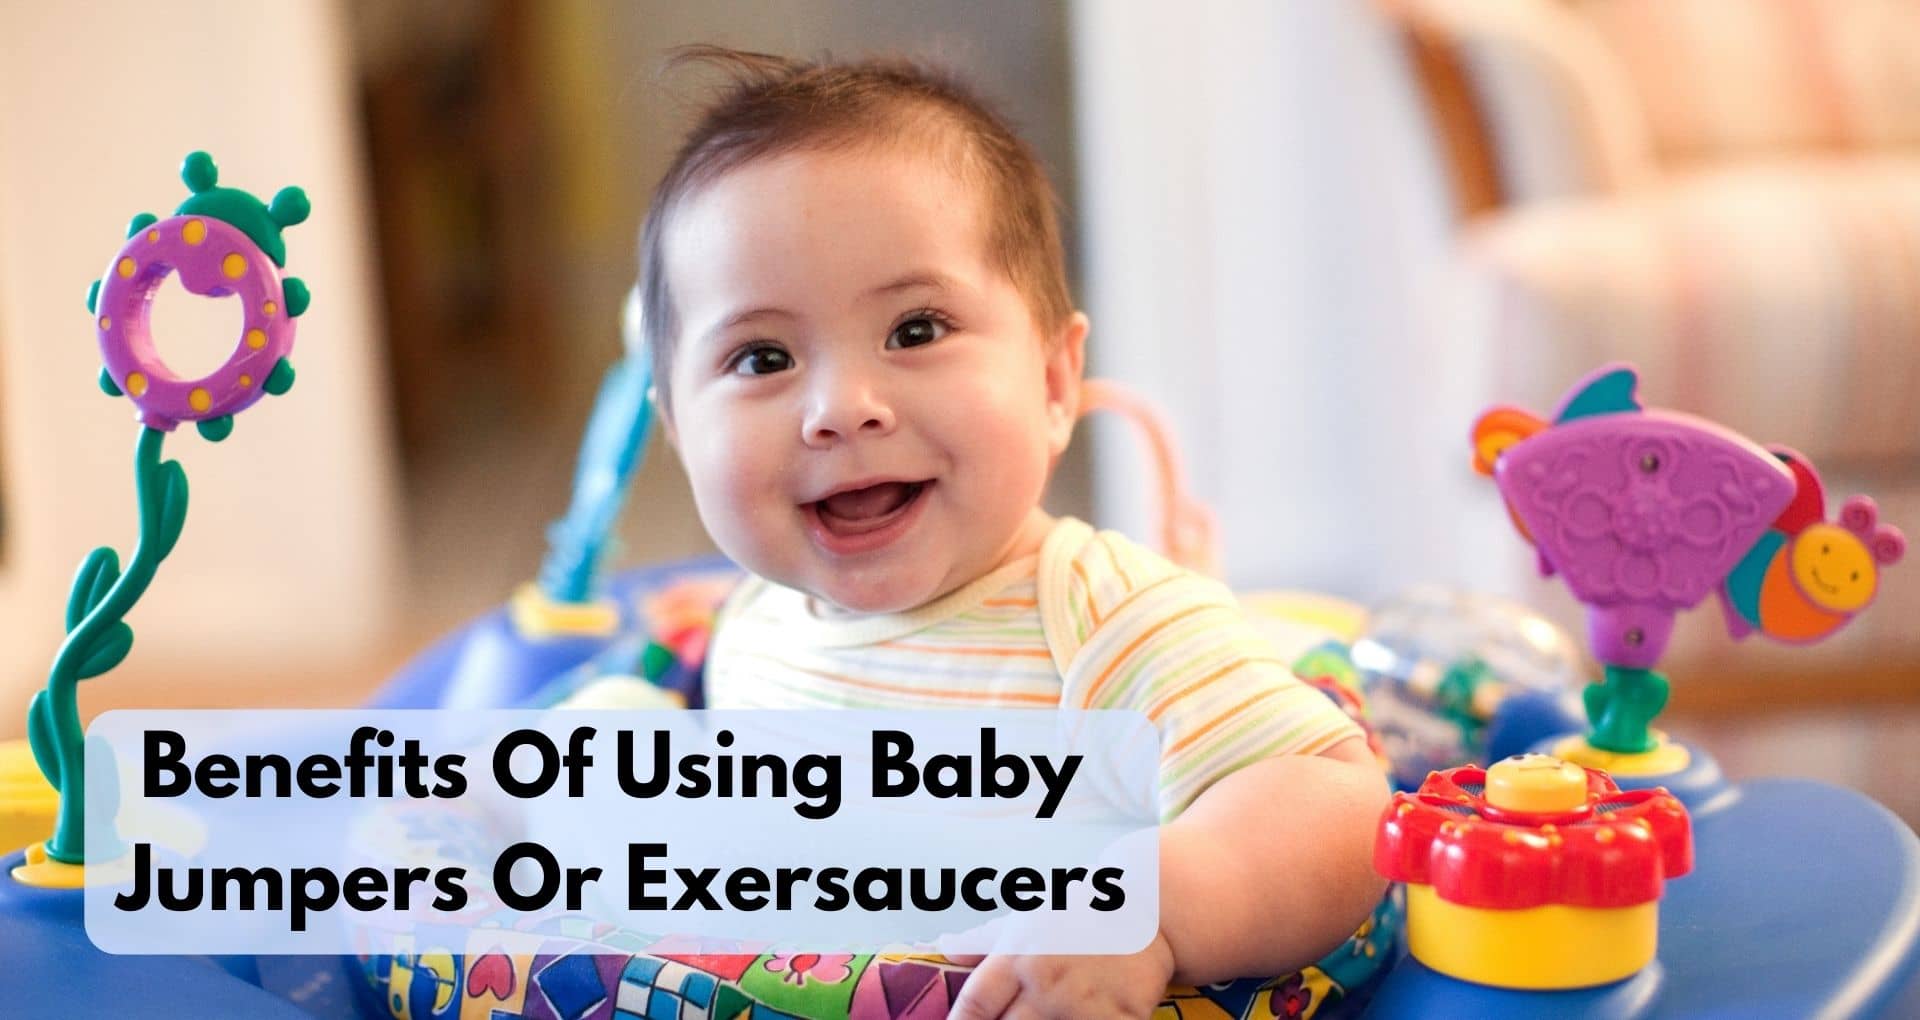 What Are The Benefits Of Using Baby Jumpers Or Exersaucers?